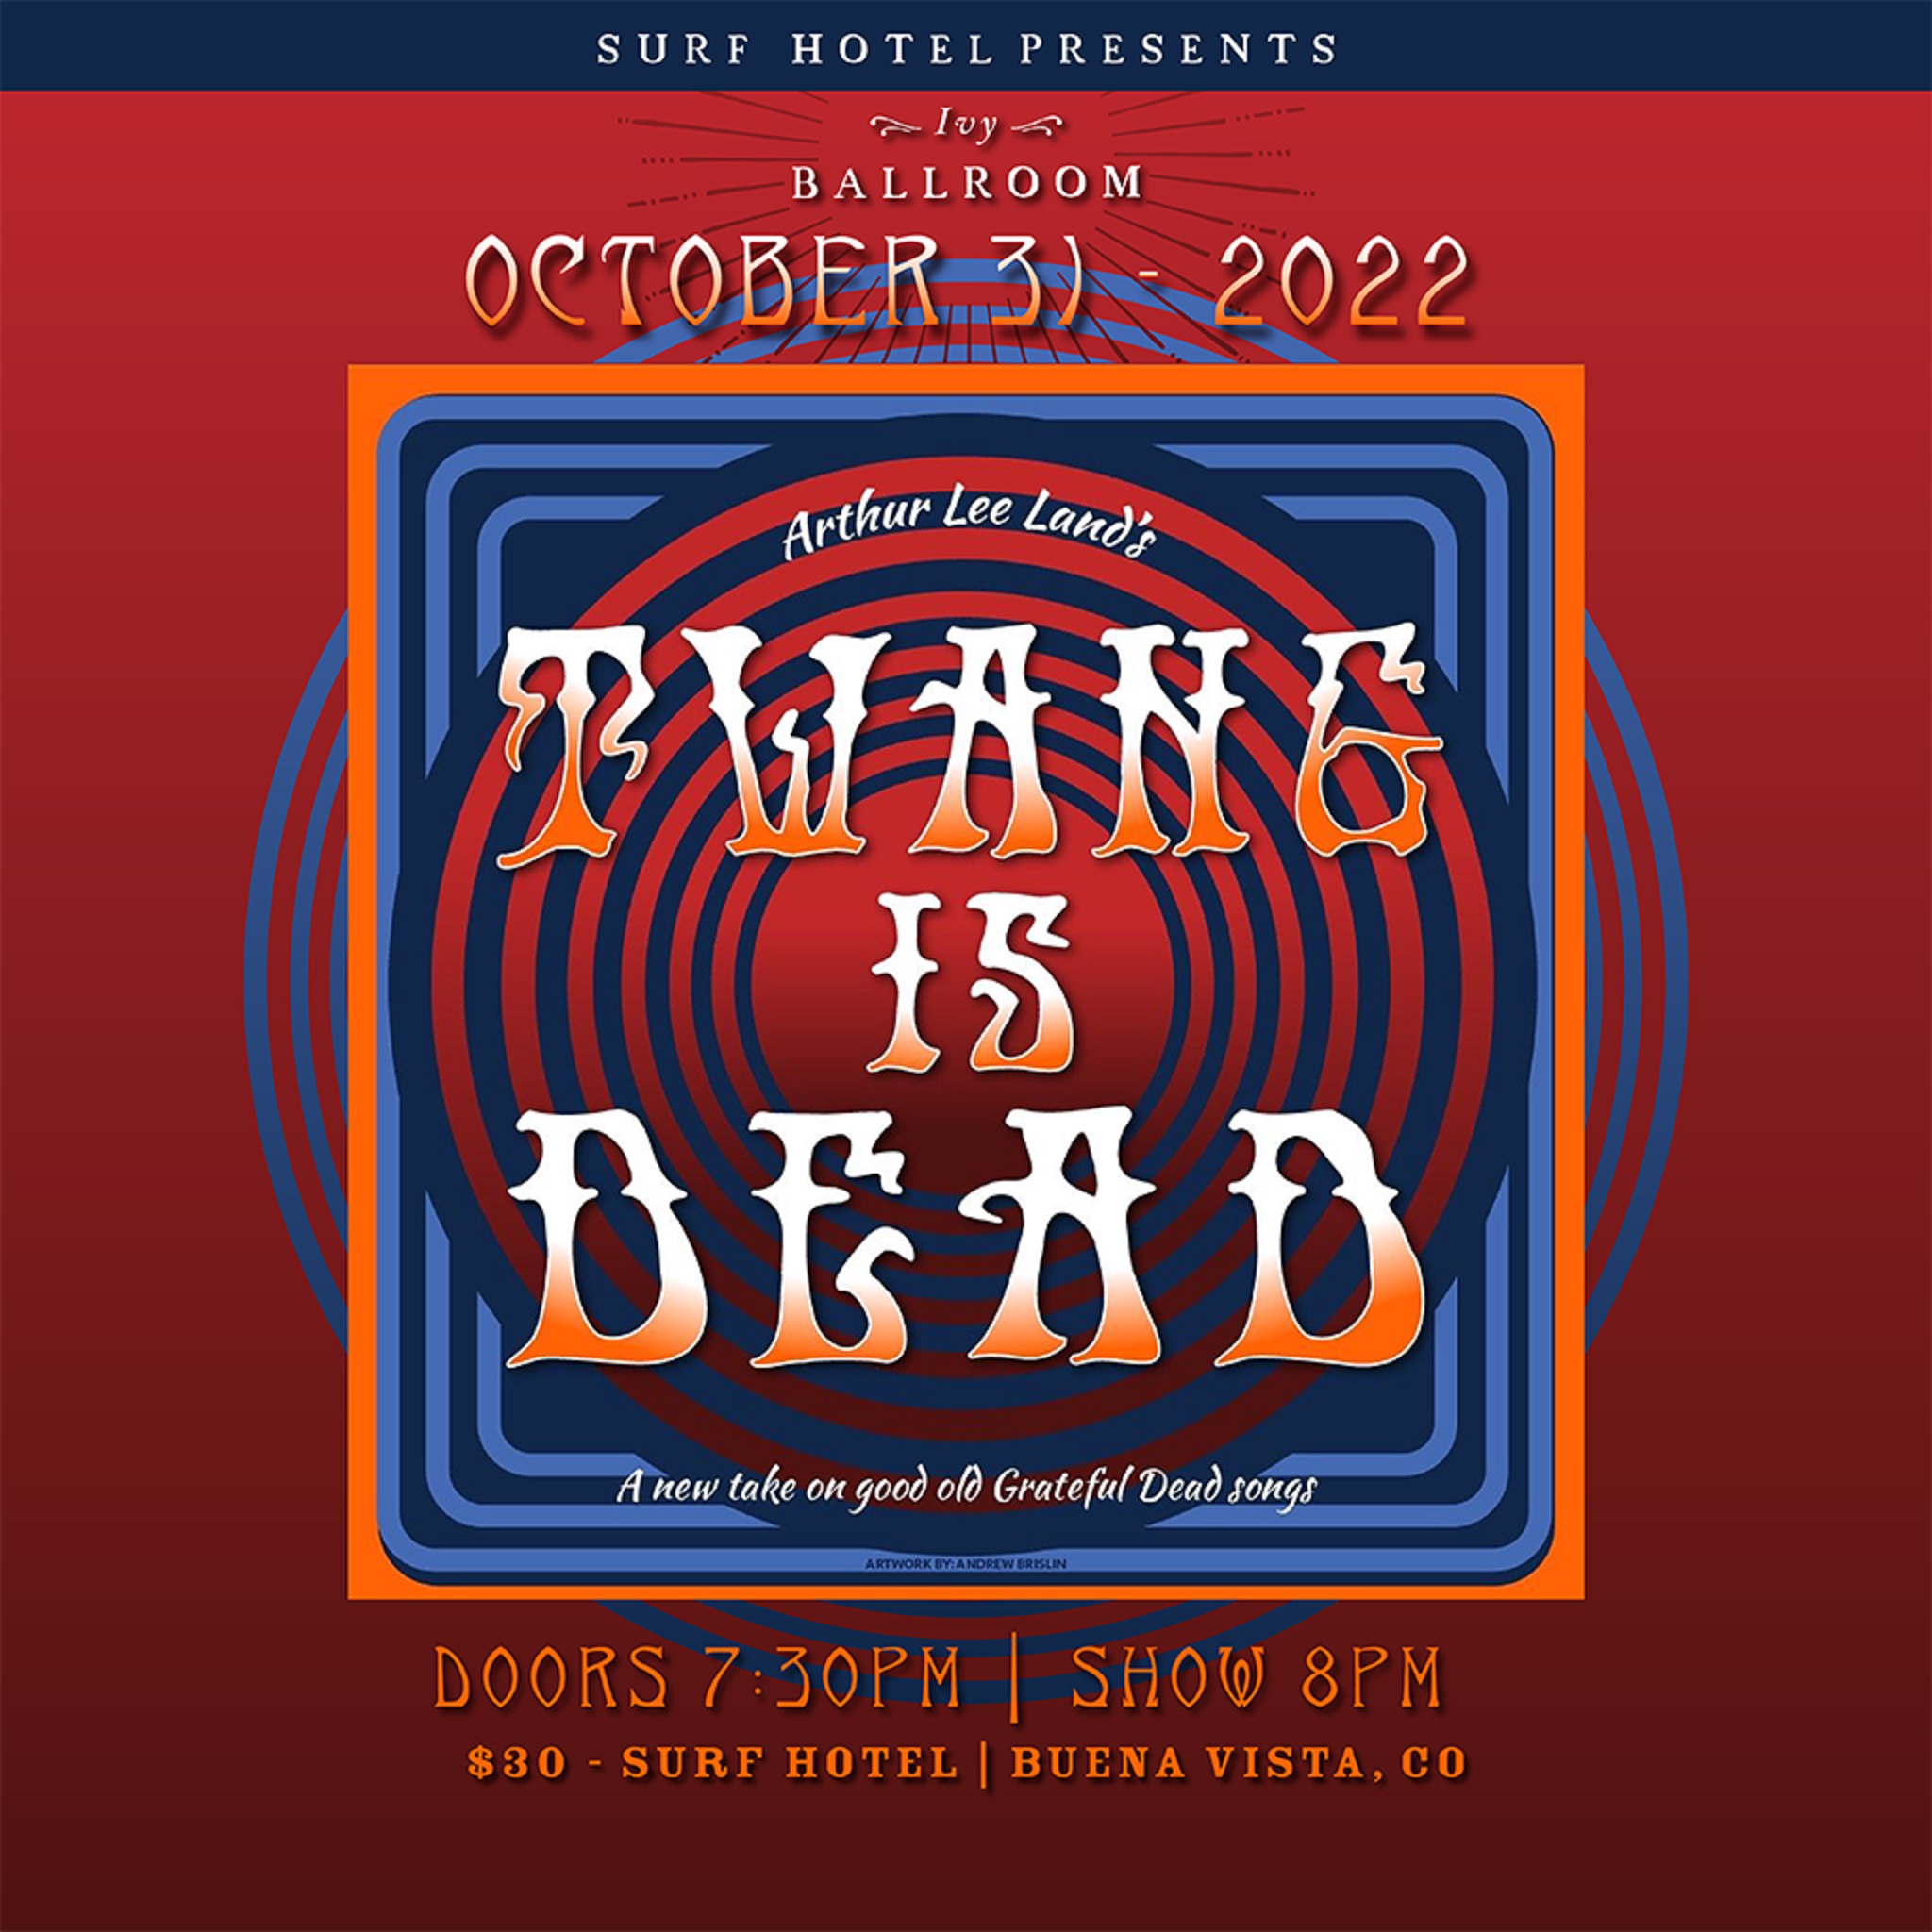 Surf Hotel Announces Halloween Concert in the Ivy Ballroom Featuring Twang Is Dead with Arthur Lee Land, Featuring Multiple Renowned Colorado Artists